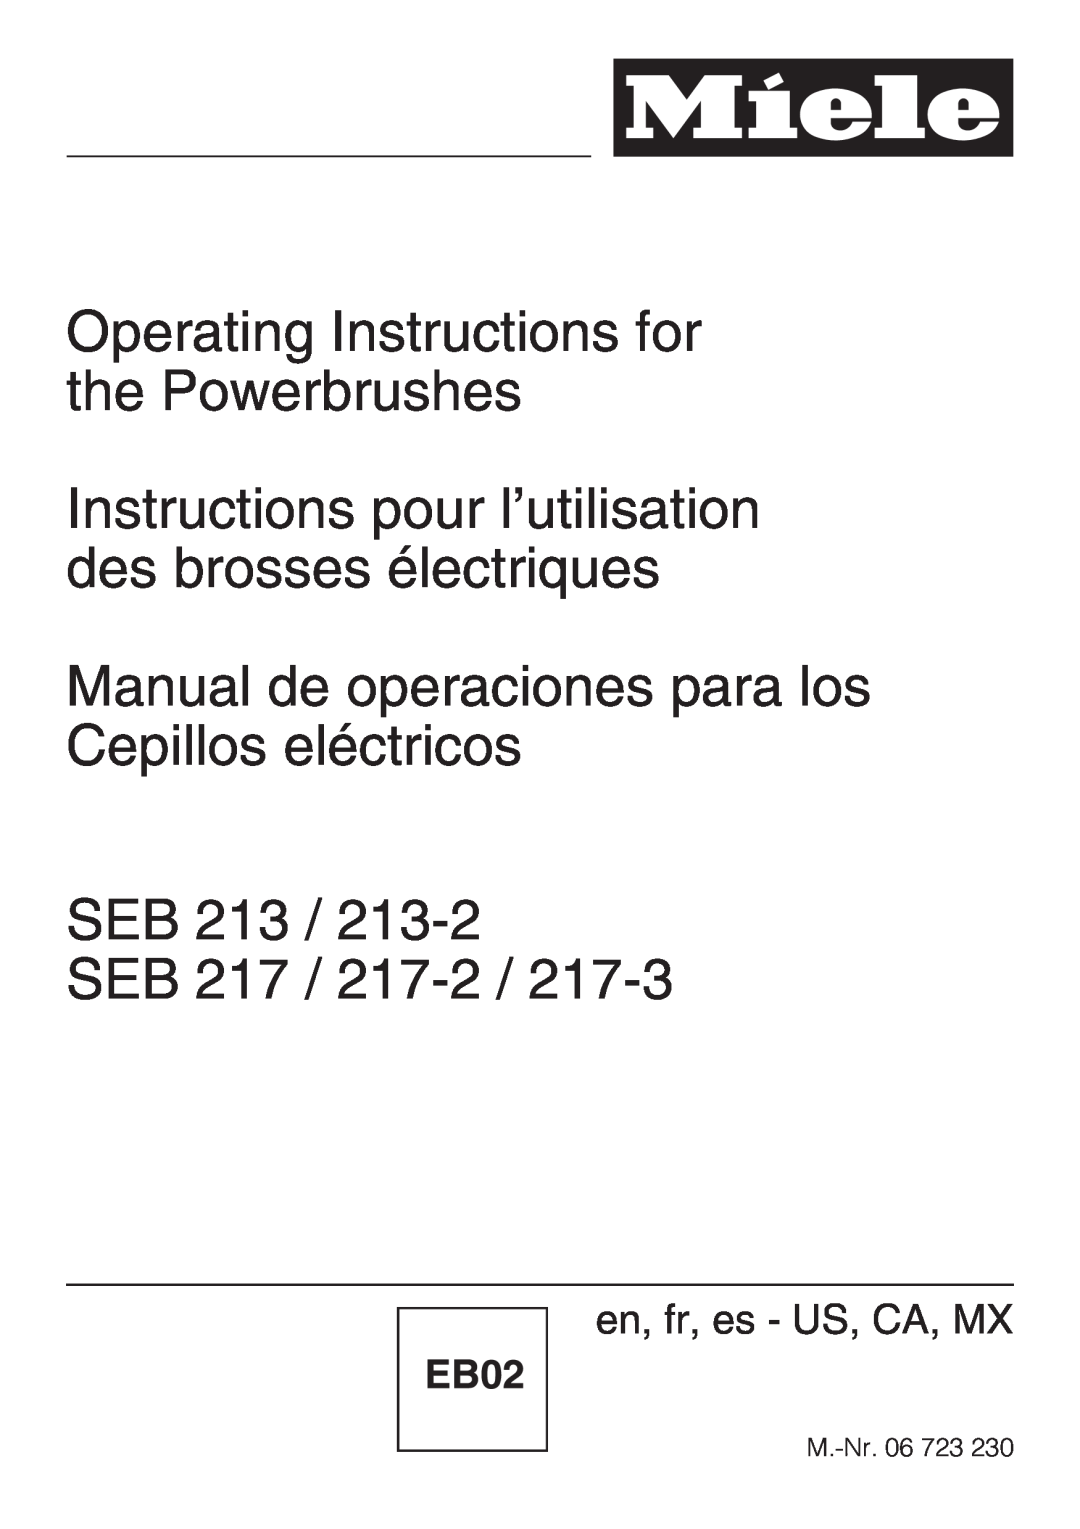 Miele 217-2 operating instructions Operating Instructions for the Powerbrushes, SEB 213 / SEB, en, fr, es - US, CA, MX 